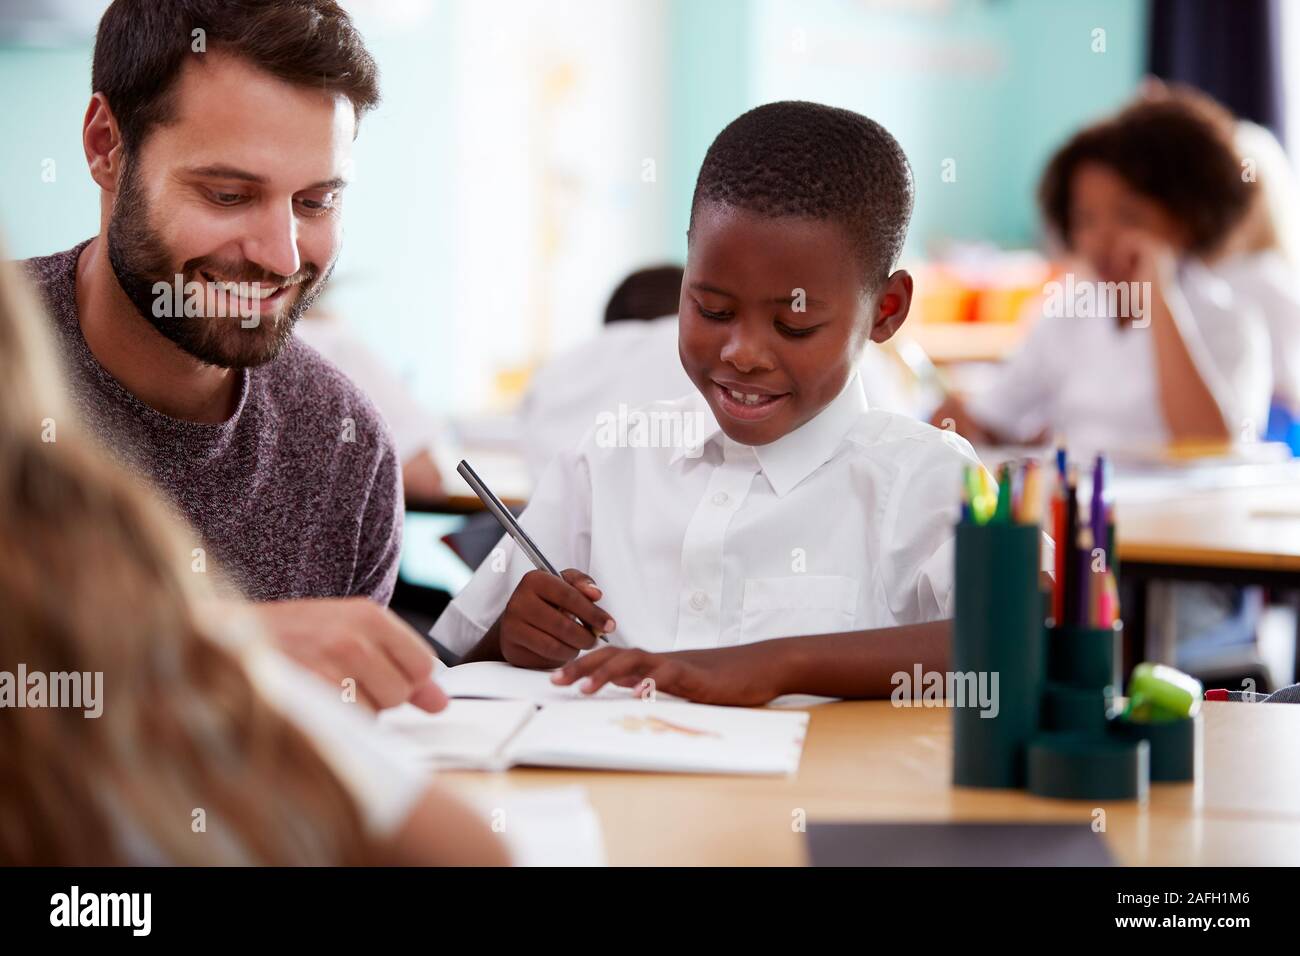 Elementary School Teacher Giving Male Pupil Wearing Uniform One To One Support In Classroom Stock Photo